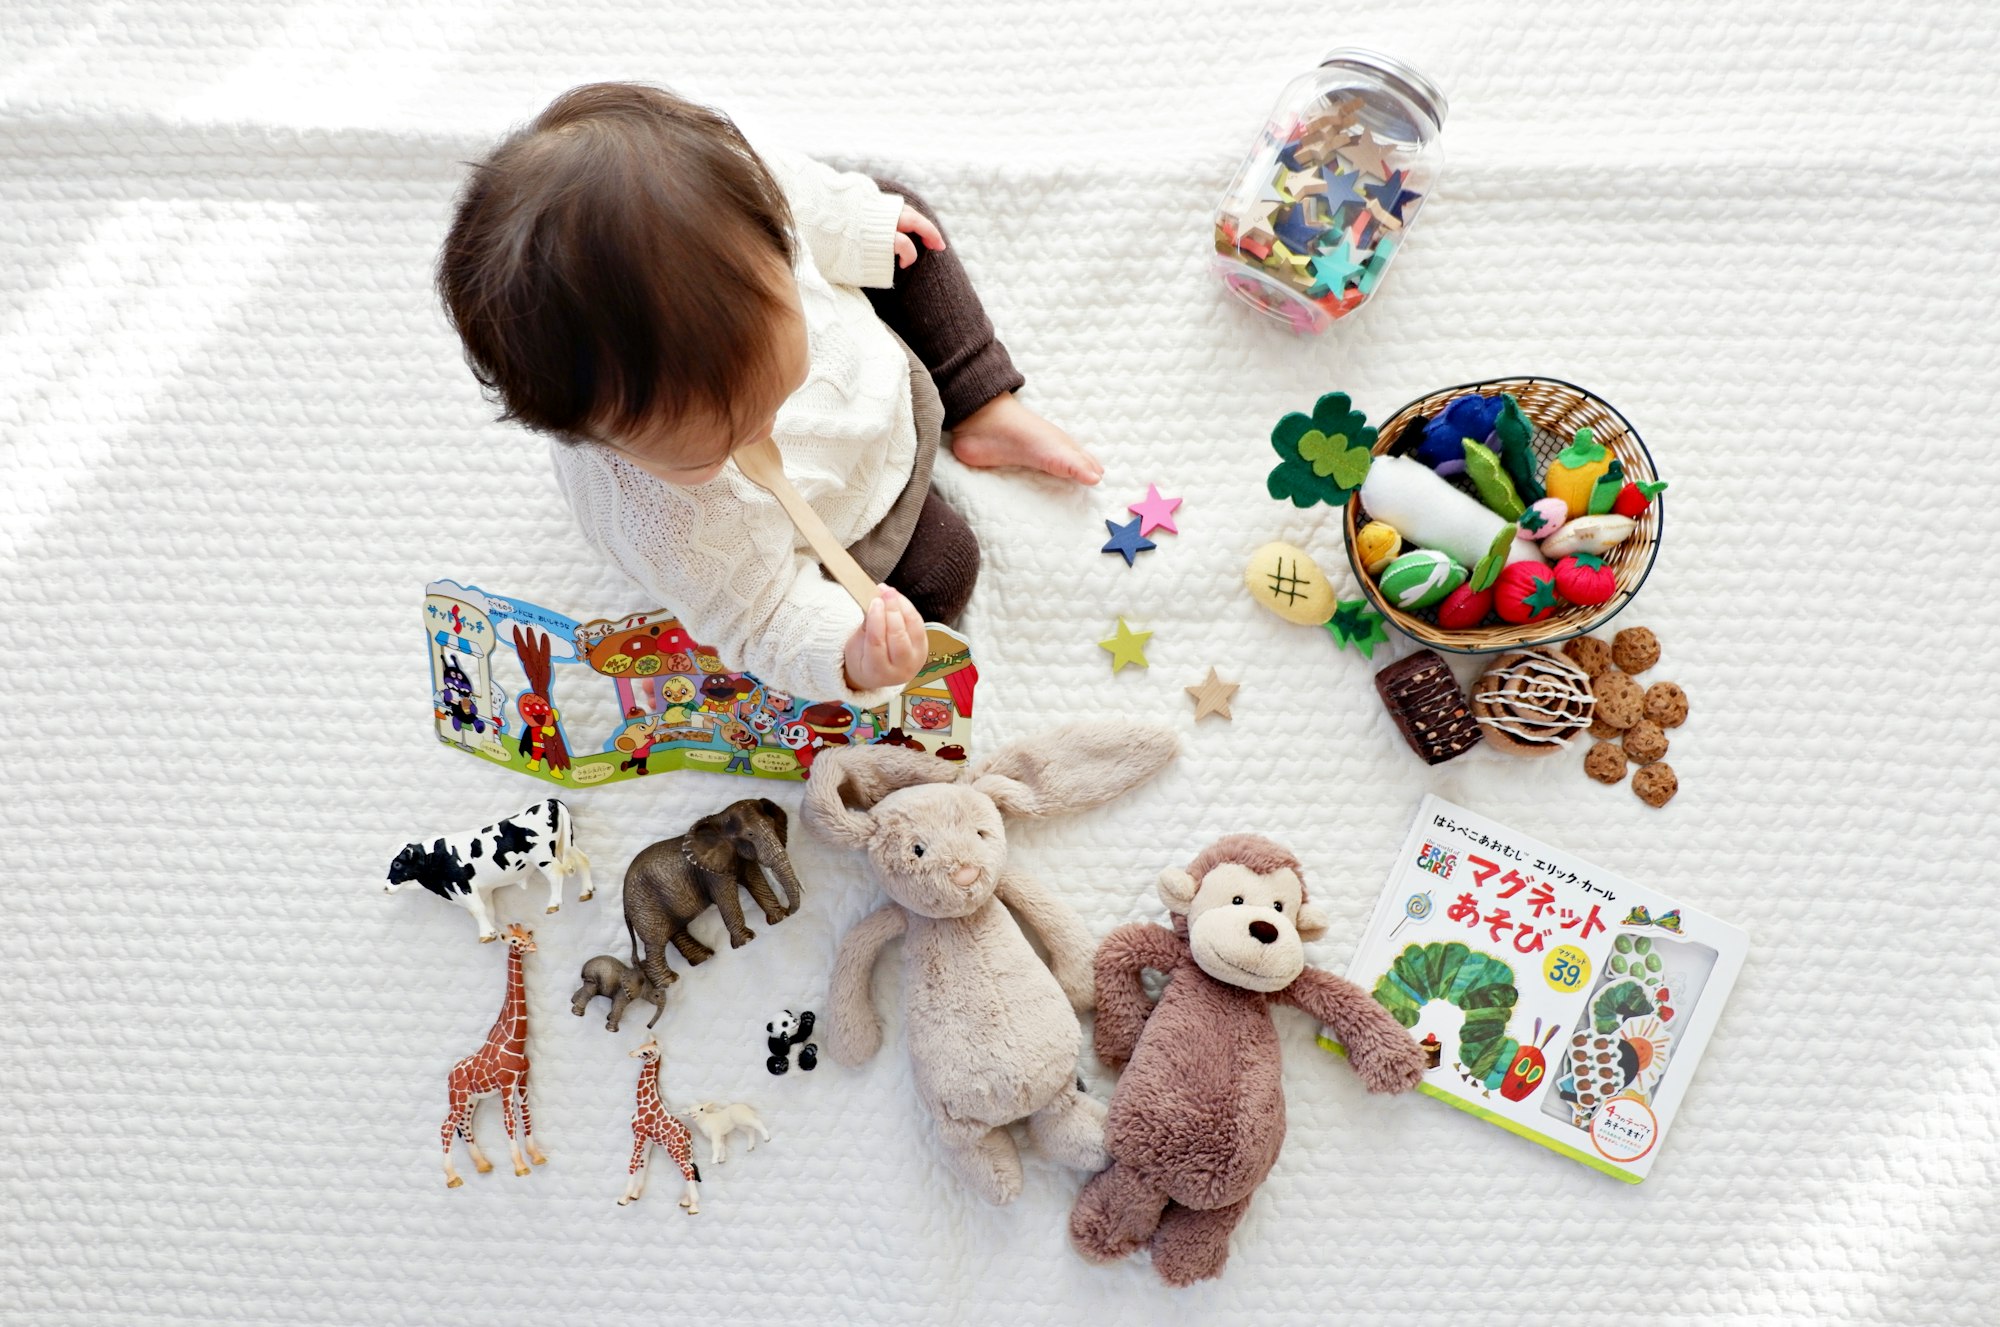 Bird's eye view of a baby surrounded by toys 